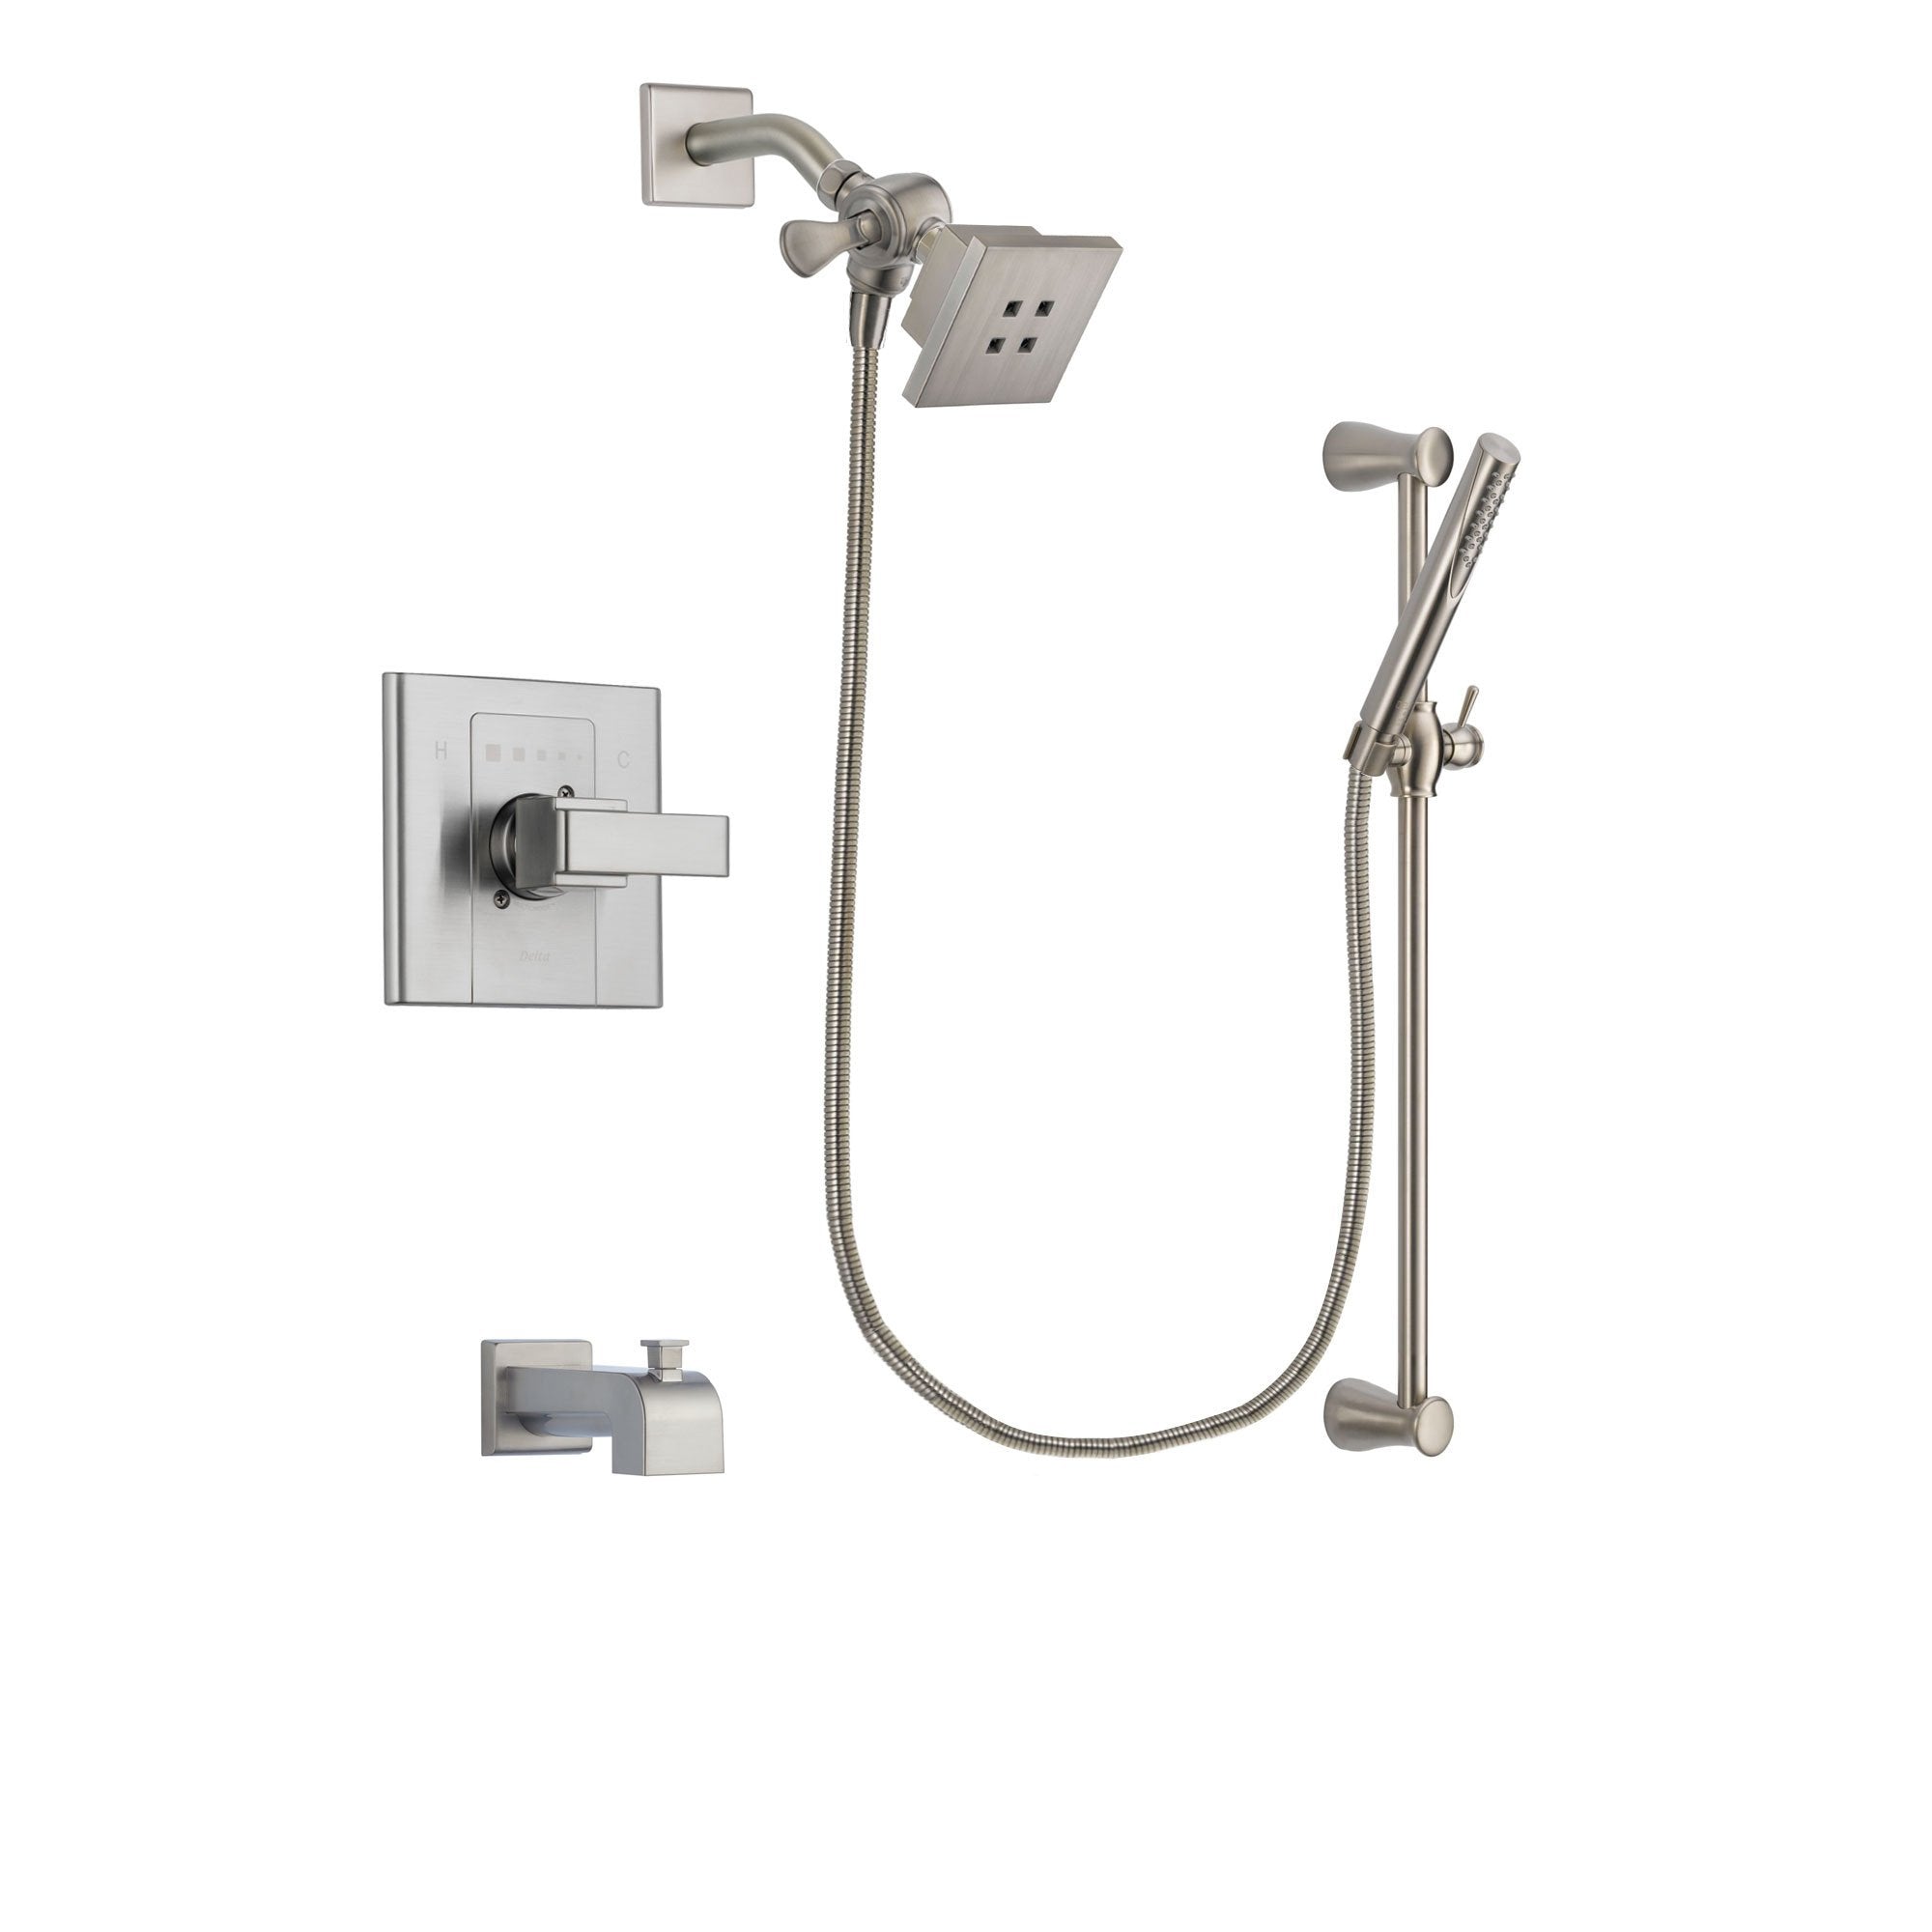 Delta Arzo Stainless Steel Finish Tub and Shower Faucet System Package with Square Showerhead and Handheld Shower Spray with Slide Bar Includes Rough-in Valve and Tub Spout DSP2283V